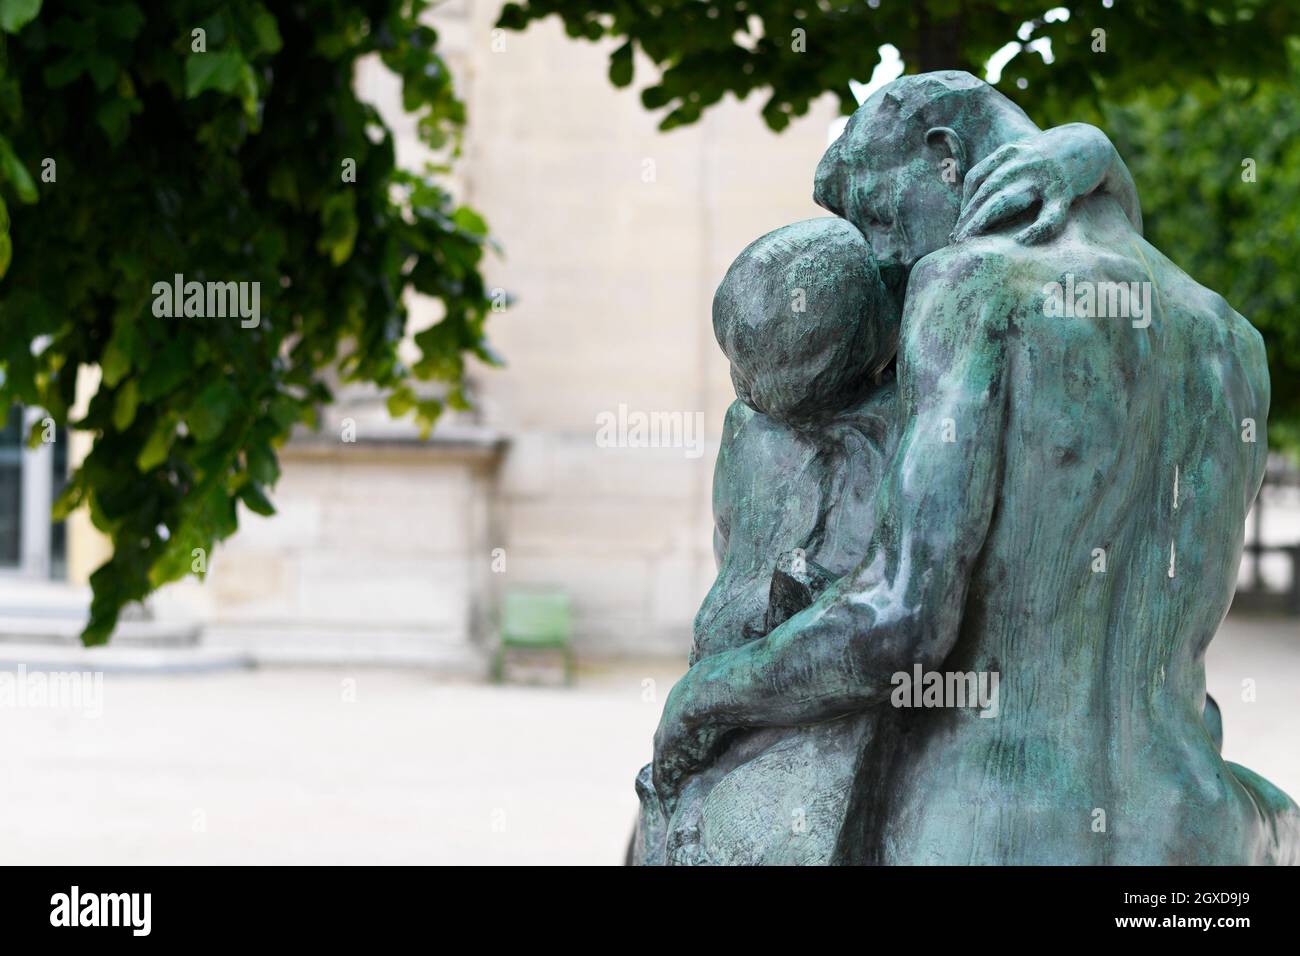 The Kiss, marble sculpture by Rodin, outside the Musee de l'Orangerie in the Tuileries Gardens, Paris, France. Stock Photo